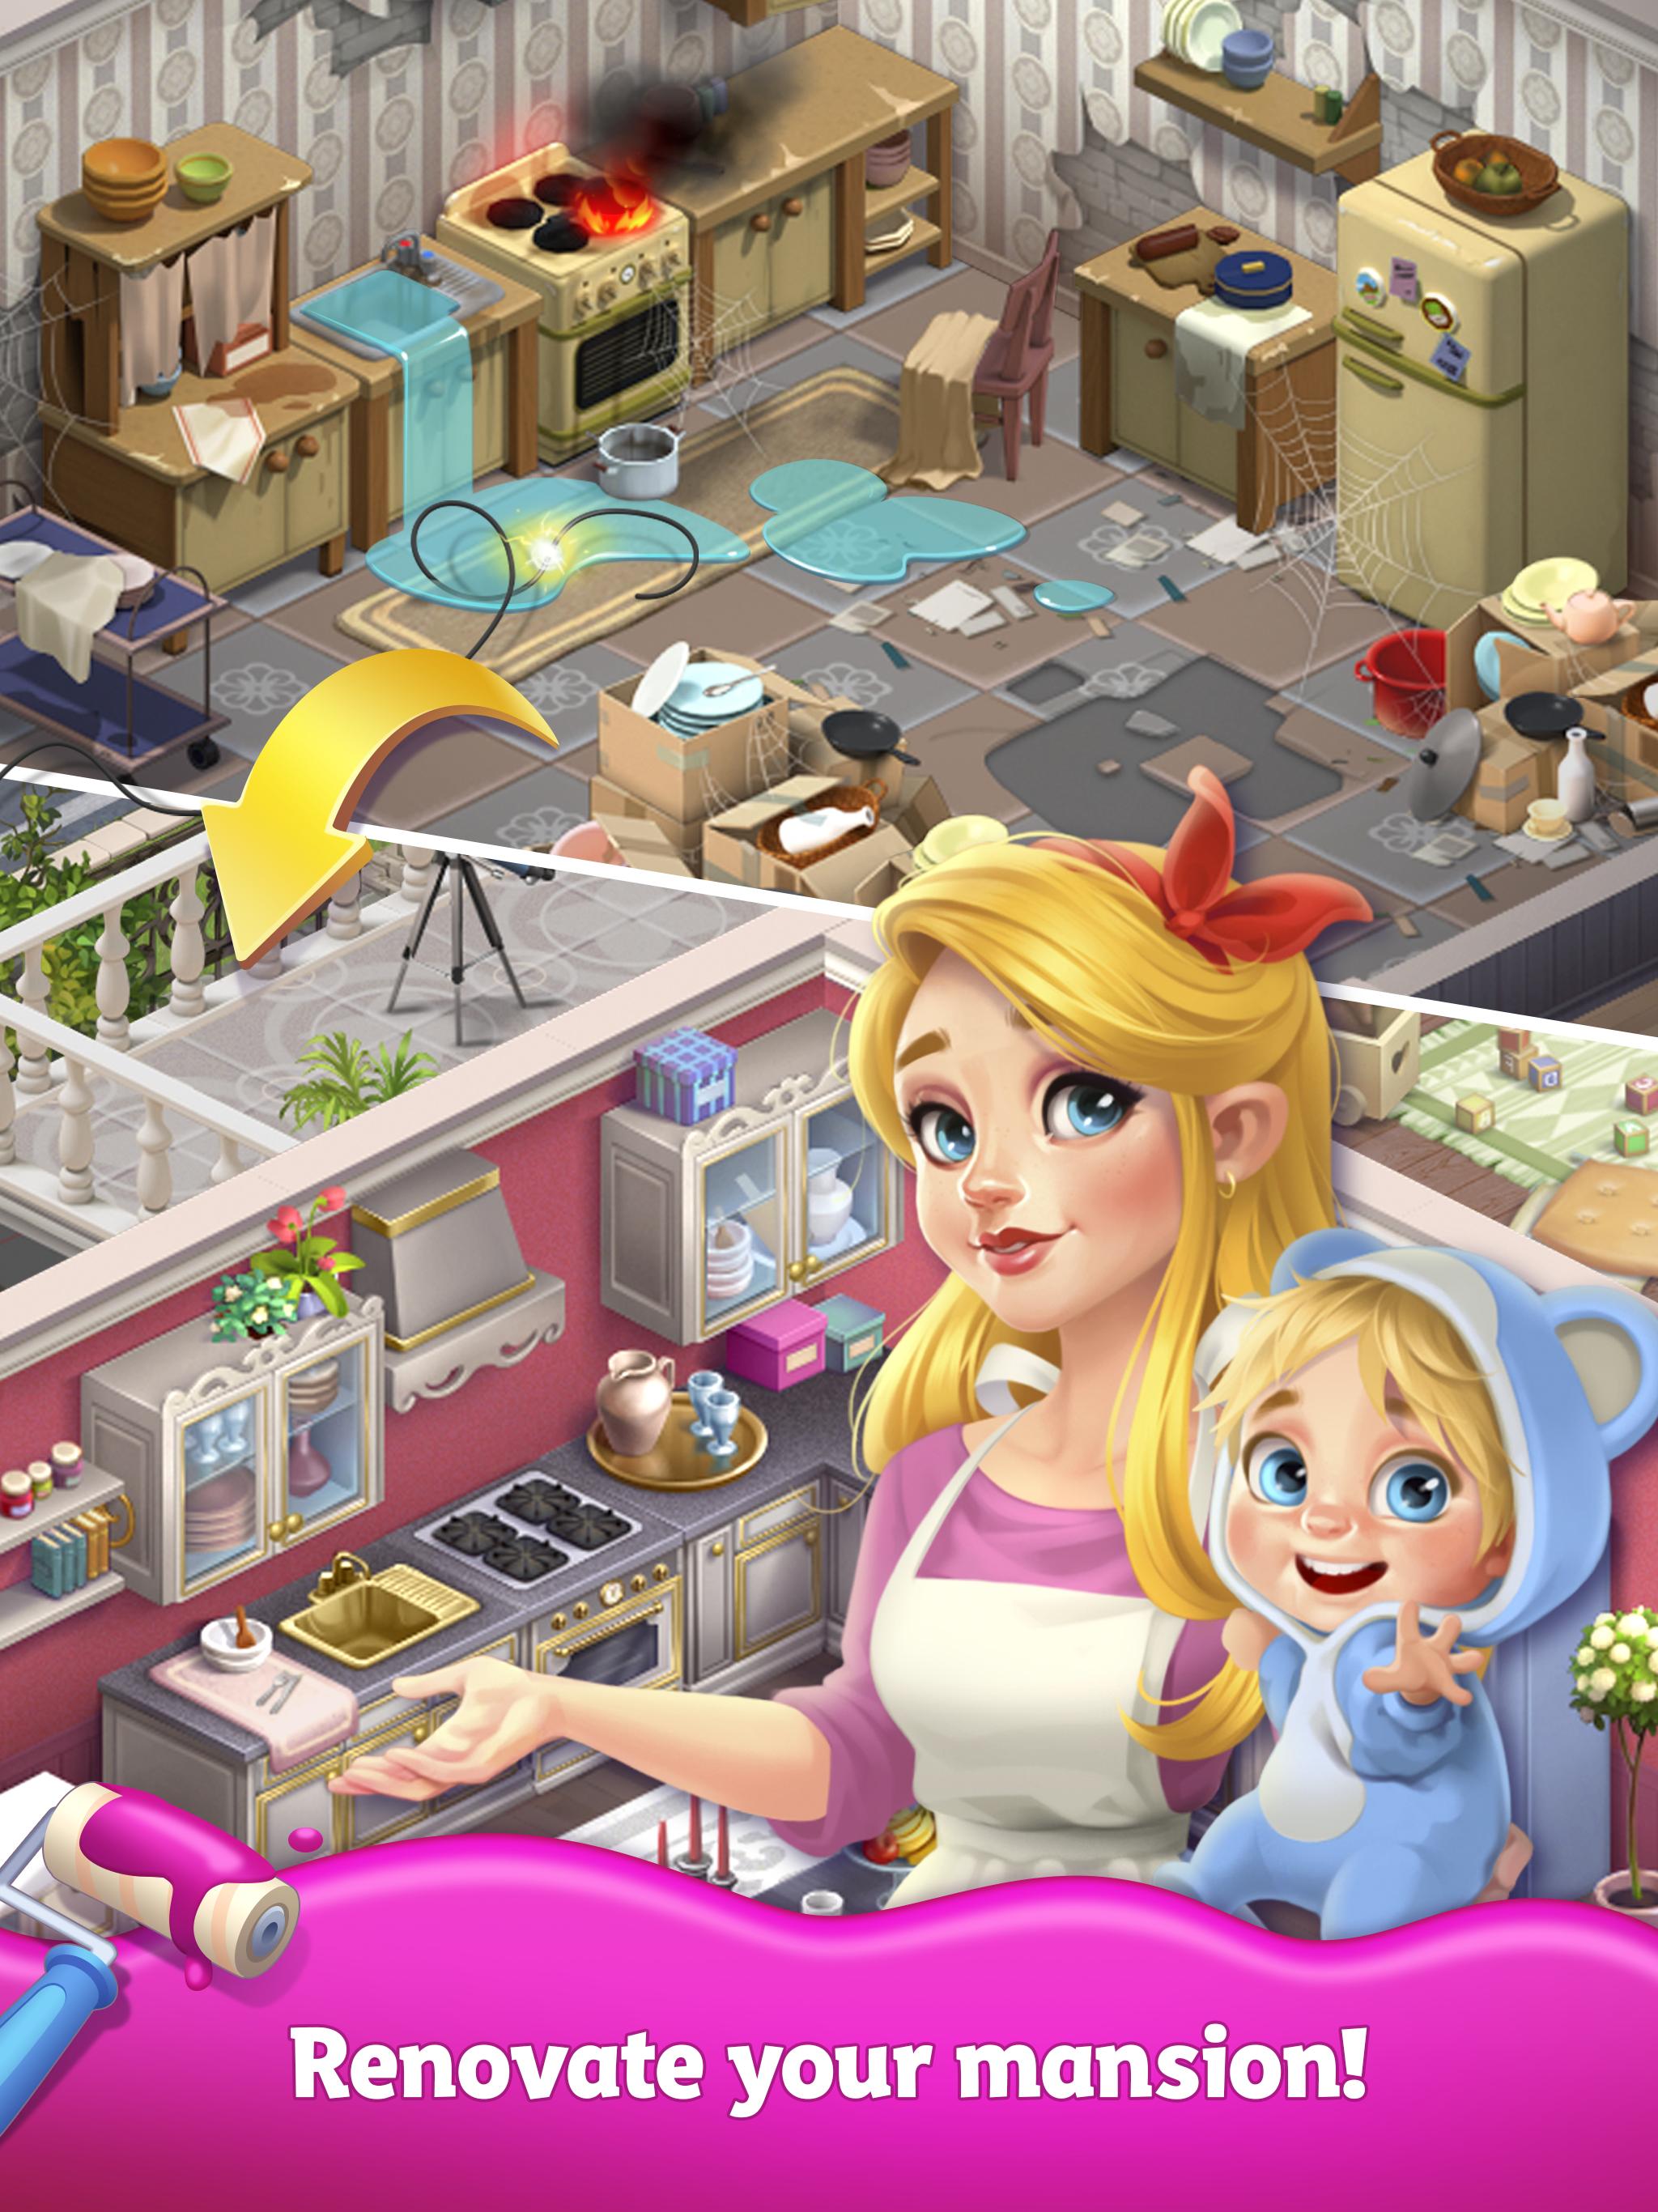 Merge Matters Home renovation game with a twist 8.8.03 Screenshot 11